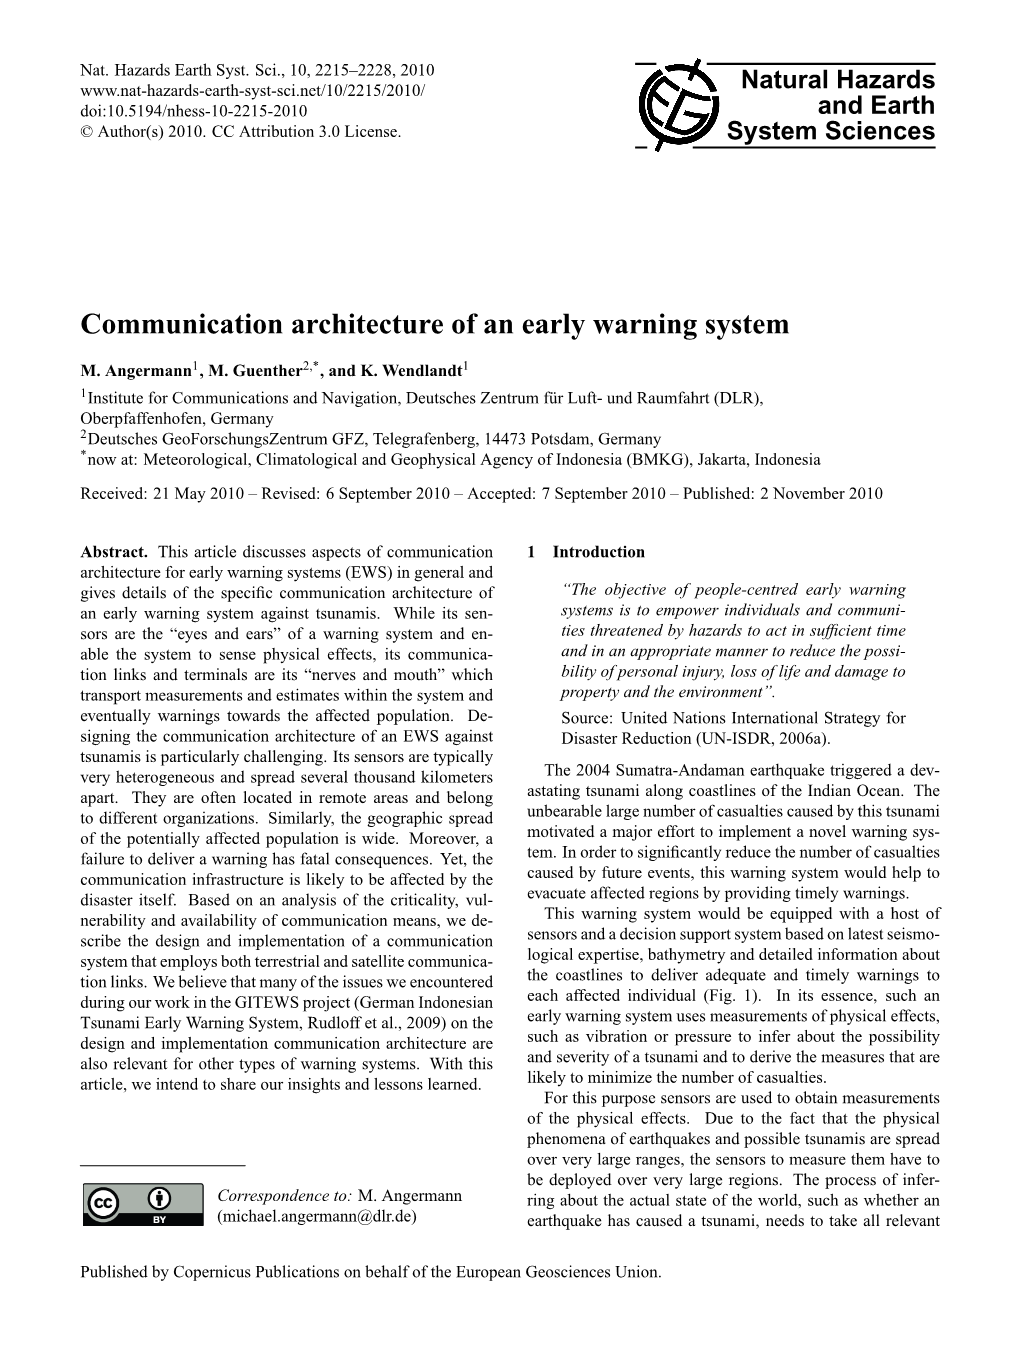 Communication Architecture of an Early Warning System